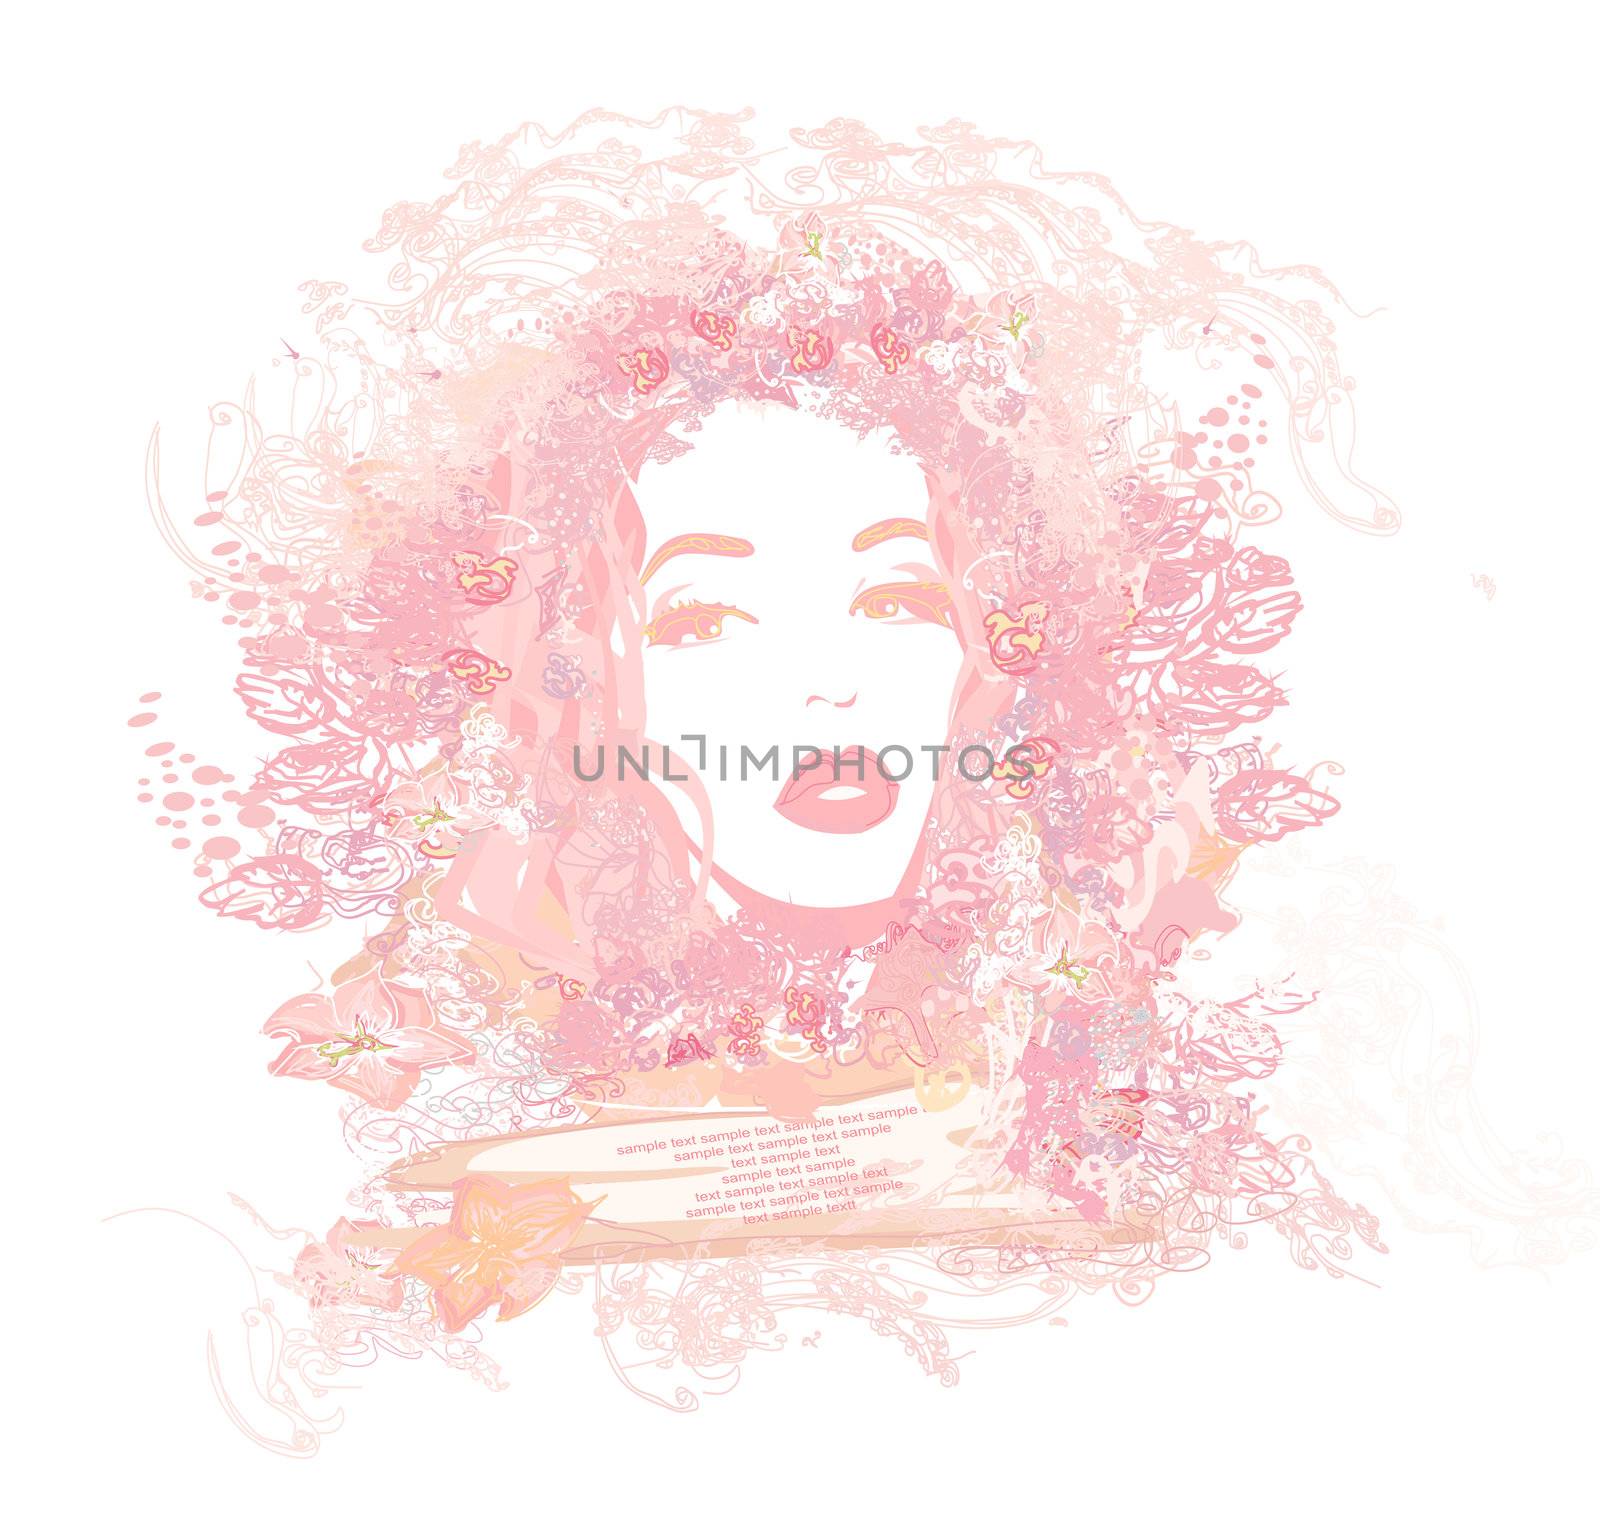 Abstract Beautiful Woman doodle Portrait- floral background